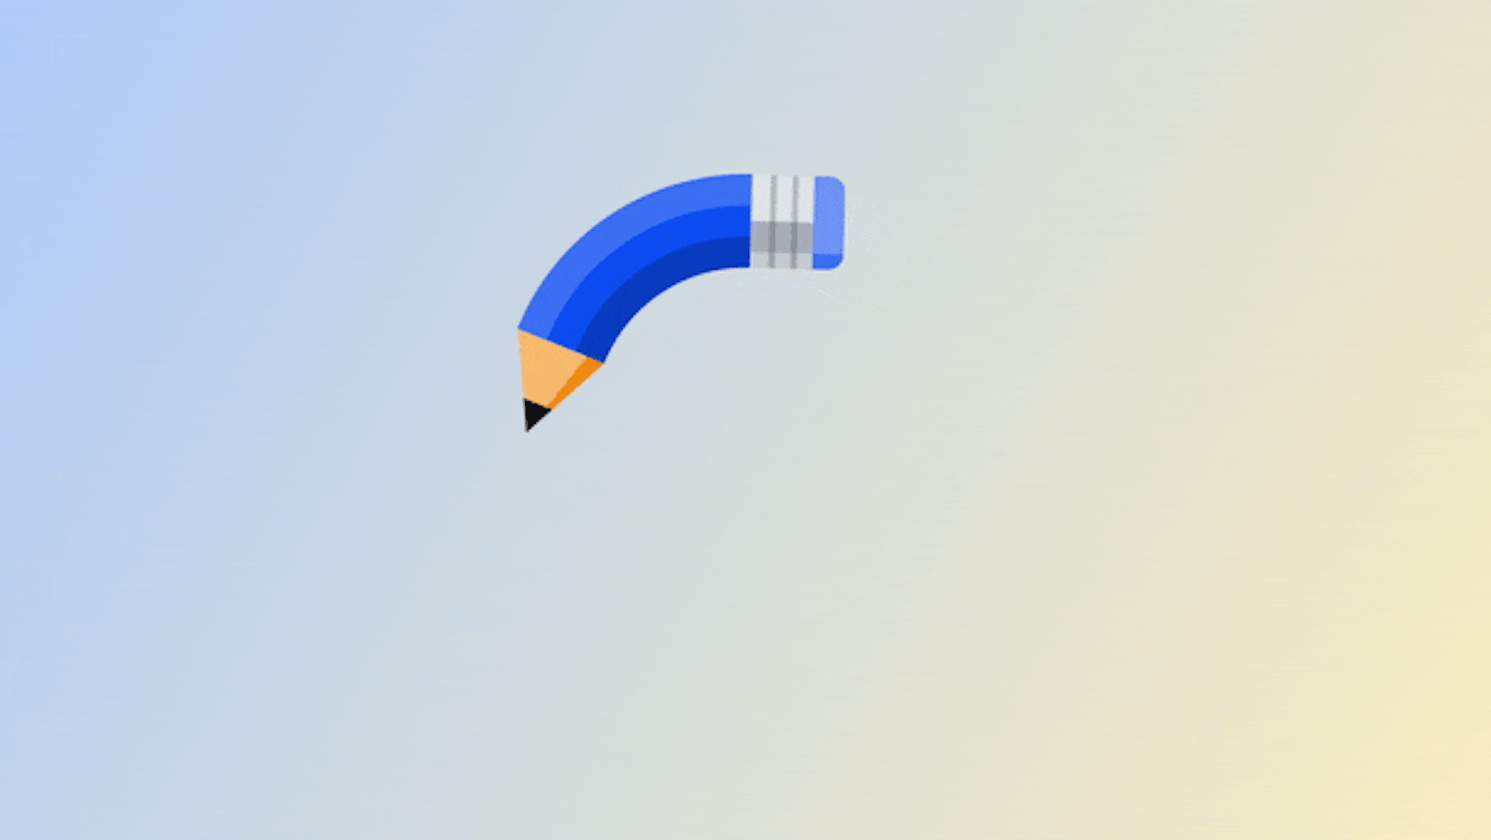 How to Create a Pencil Loader Animation with CSS